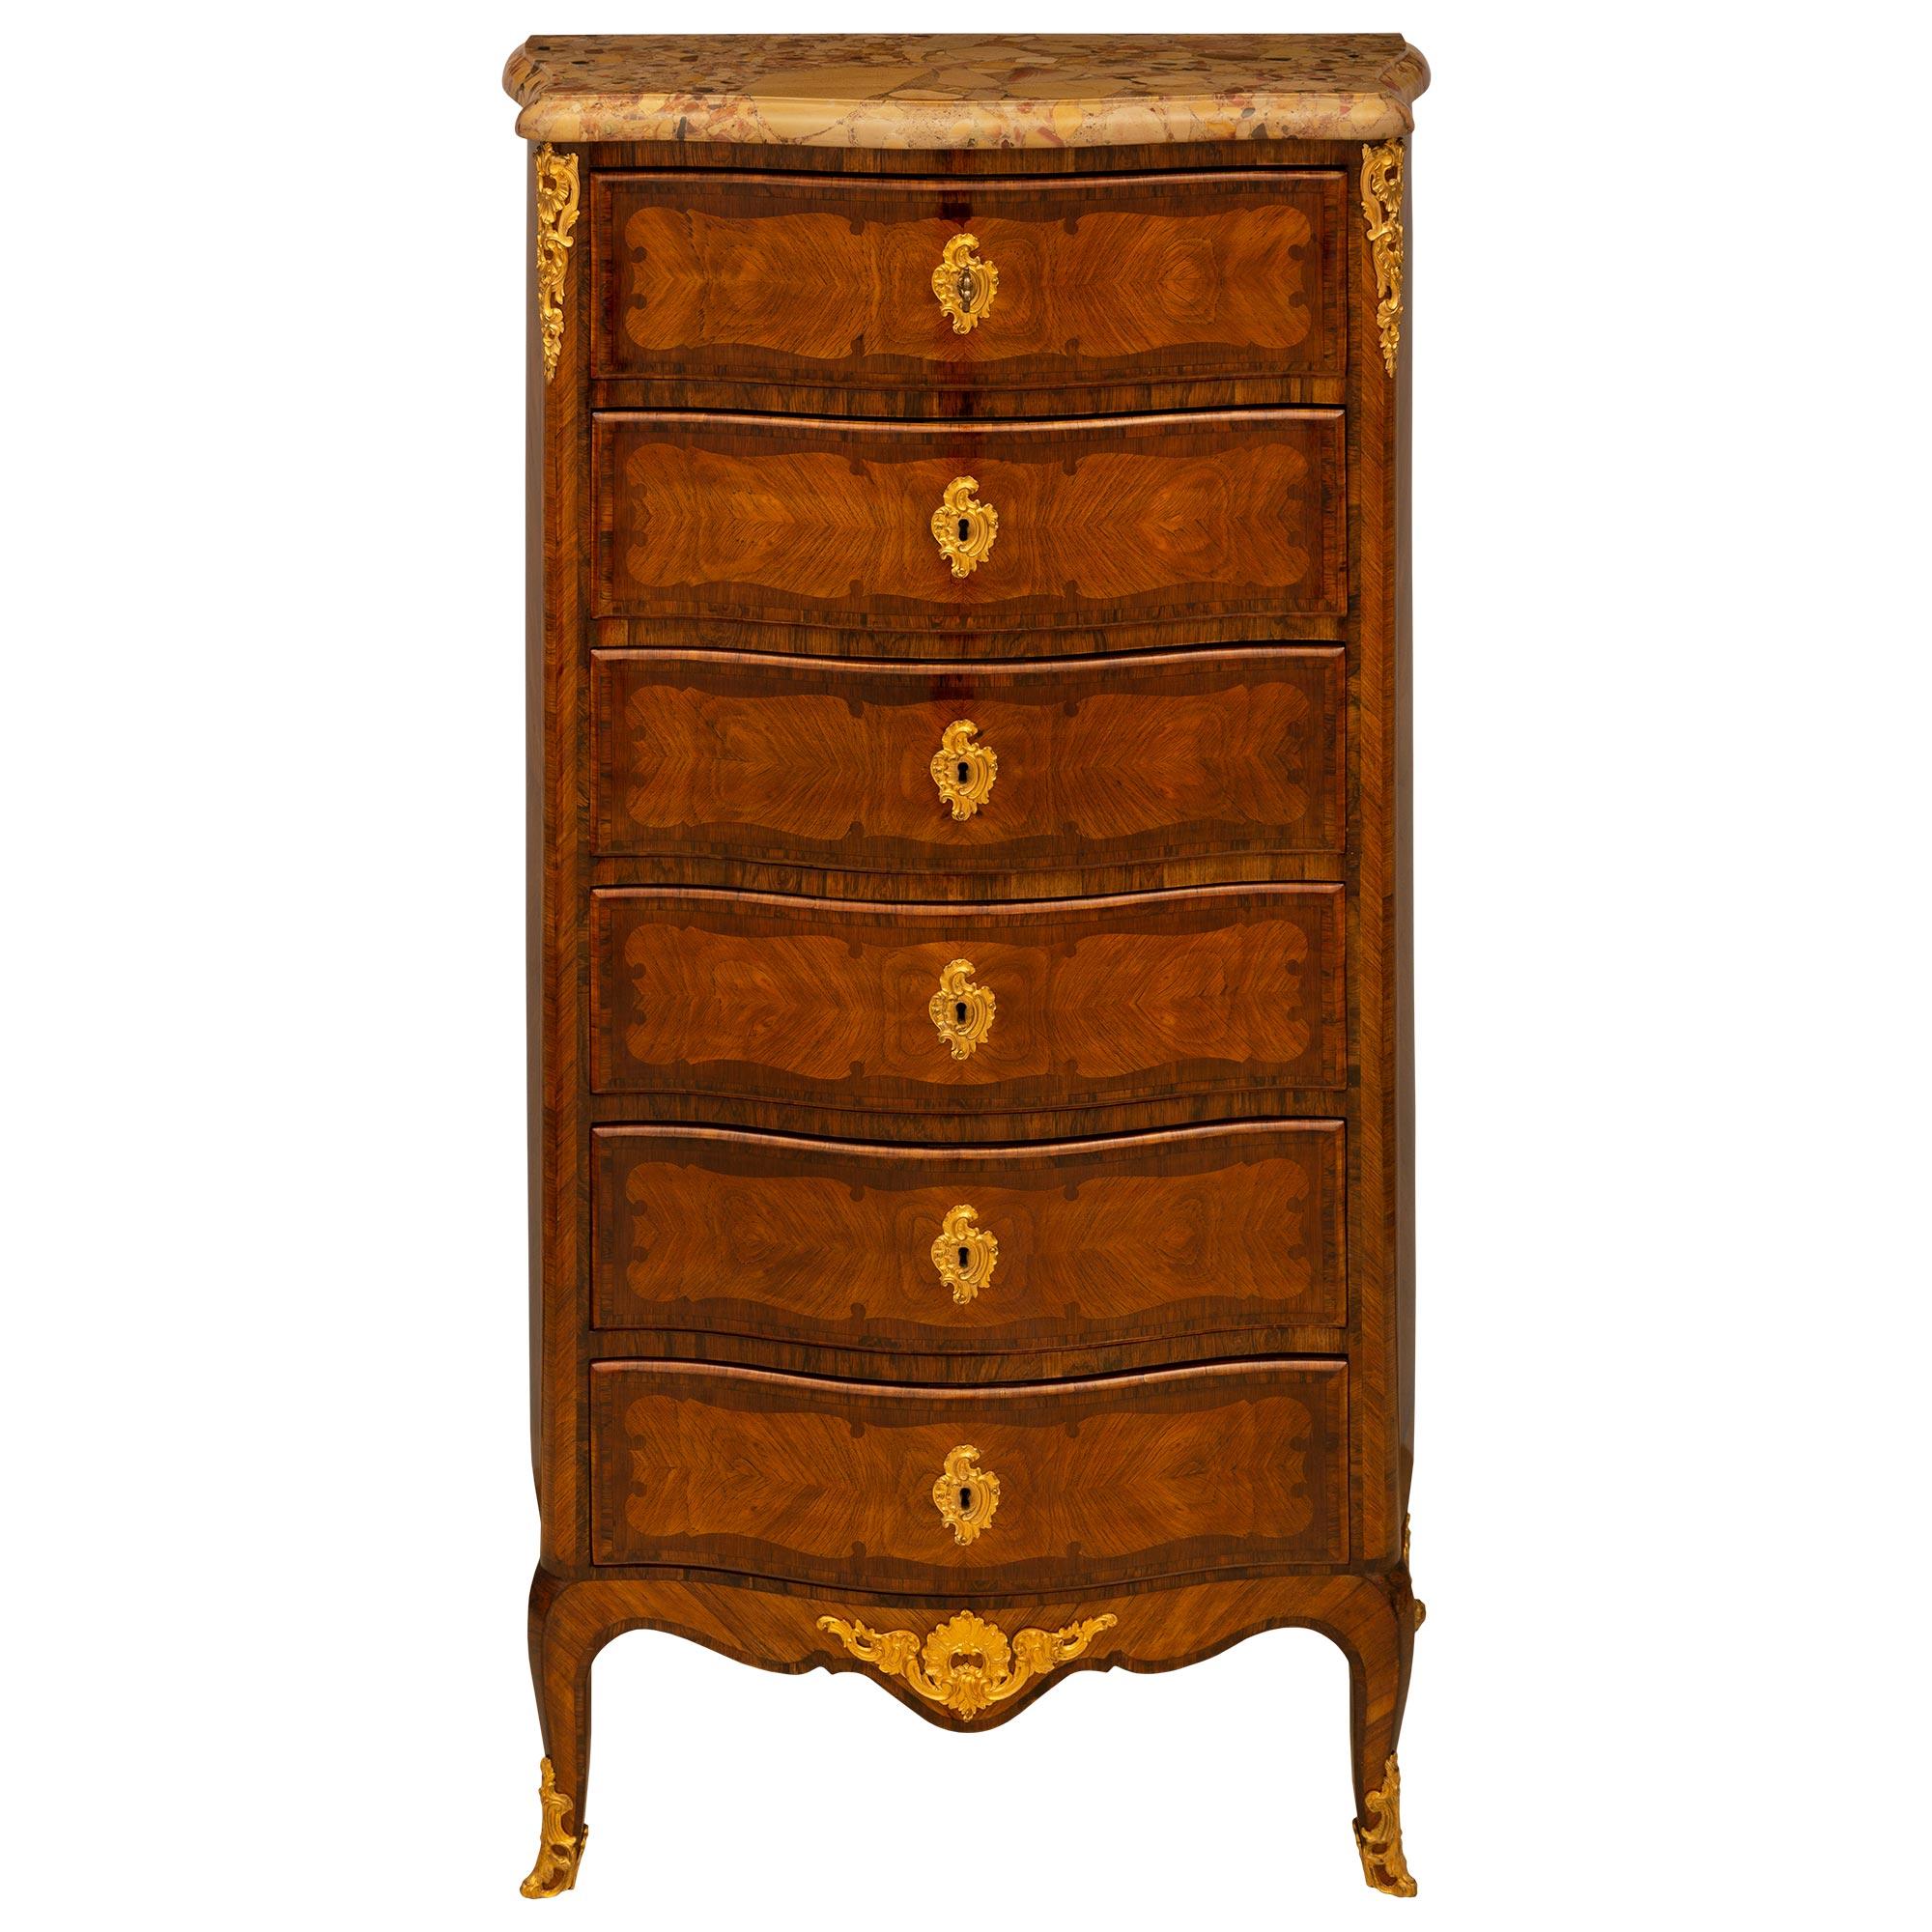 French 19th Century Transitional Style Kingwood and Ormolu Six Drawer Chiffonier For Sale 7